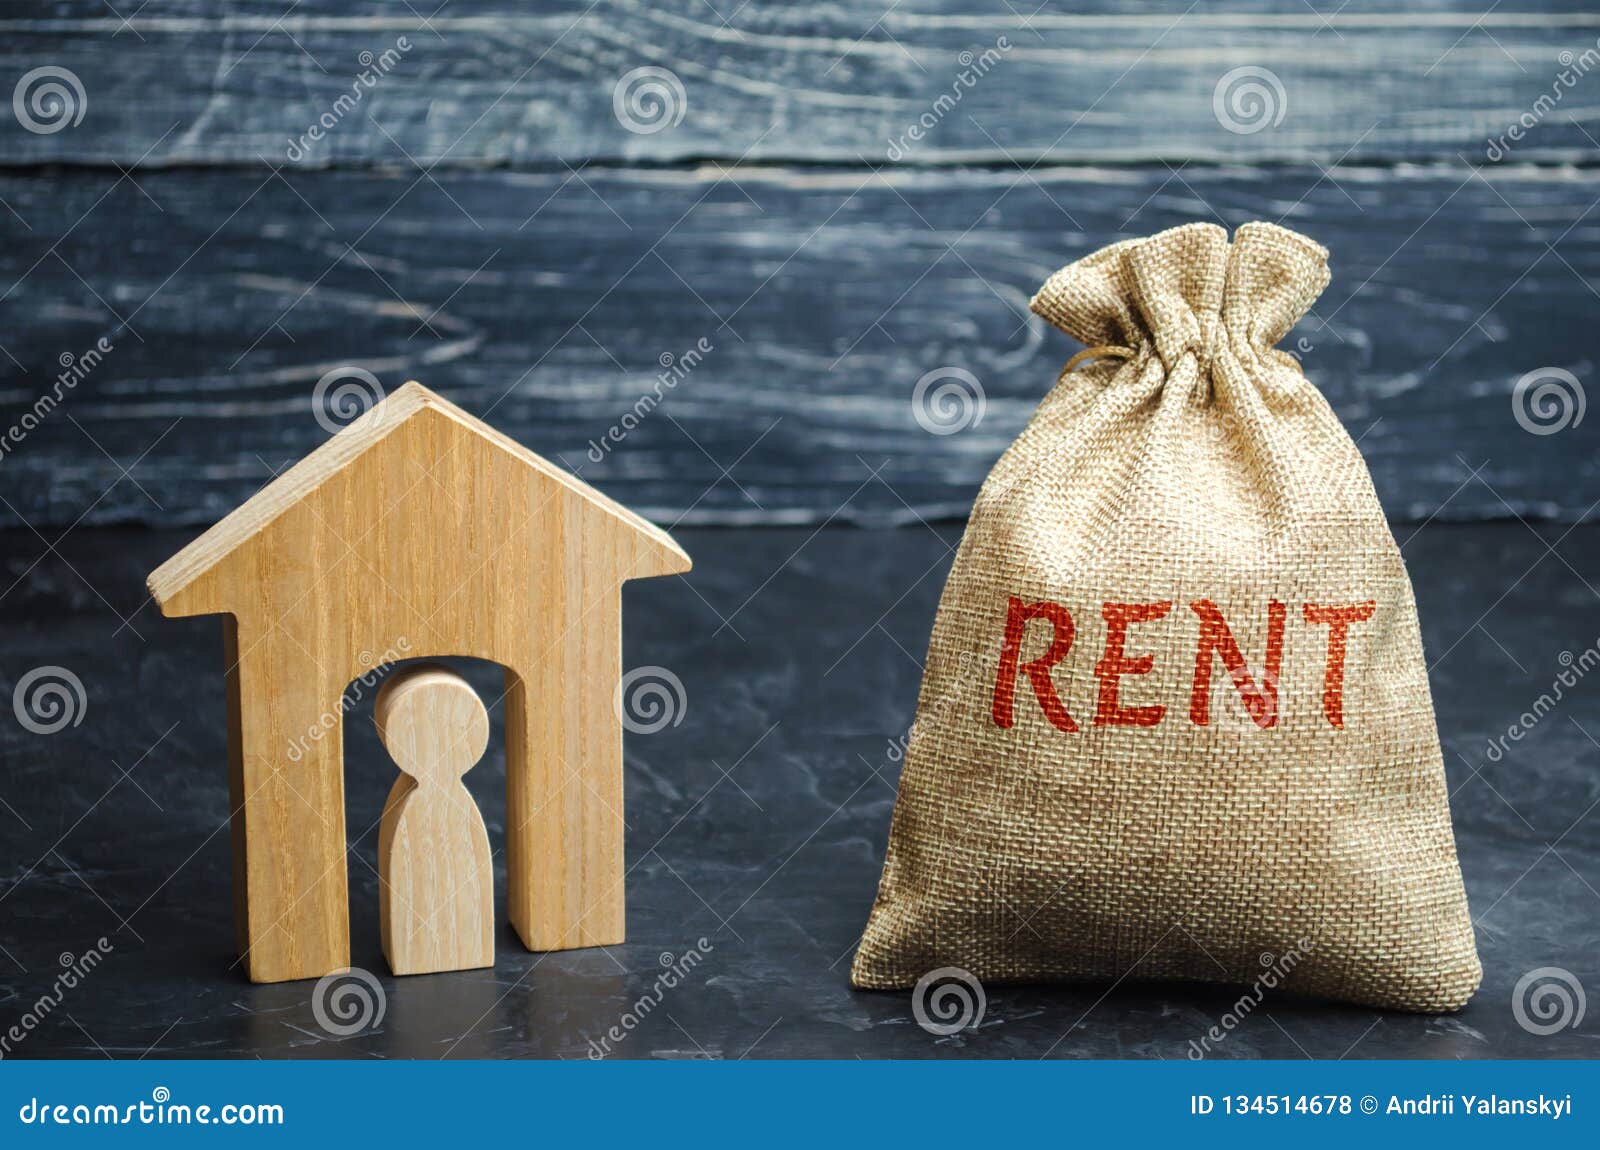 A Bag With Money And The Word Rent And A House With A Tenant Inside. The Accumulation Of Money ...